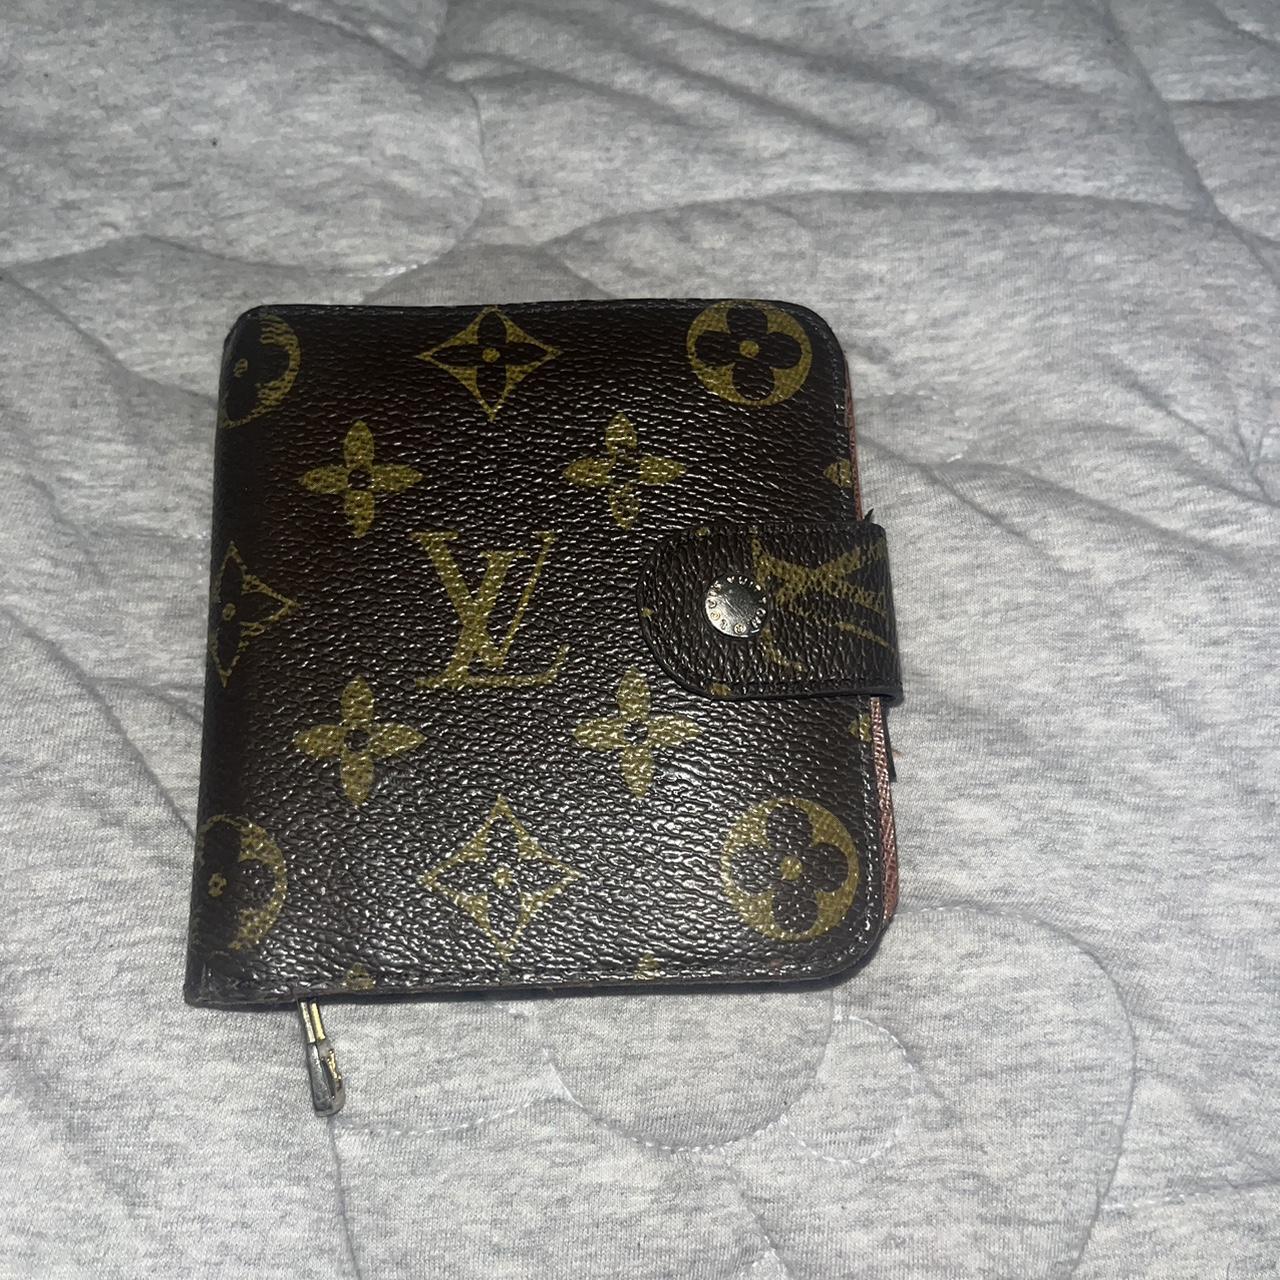 Authentic LV Wallet Purse in Black Brand New never used - Depop